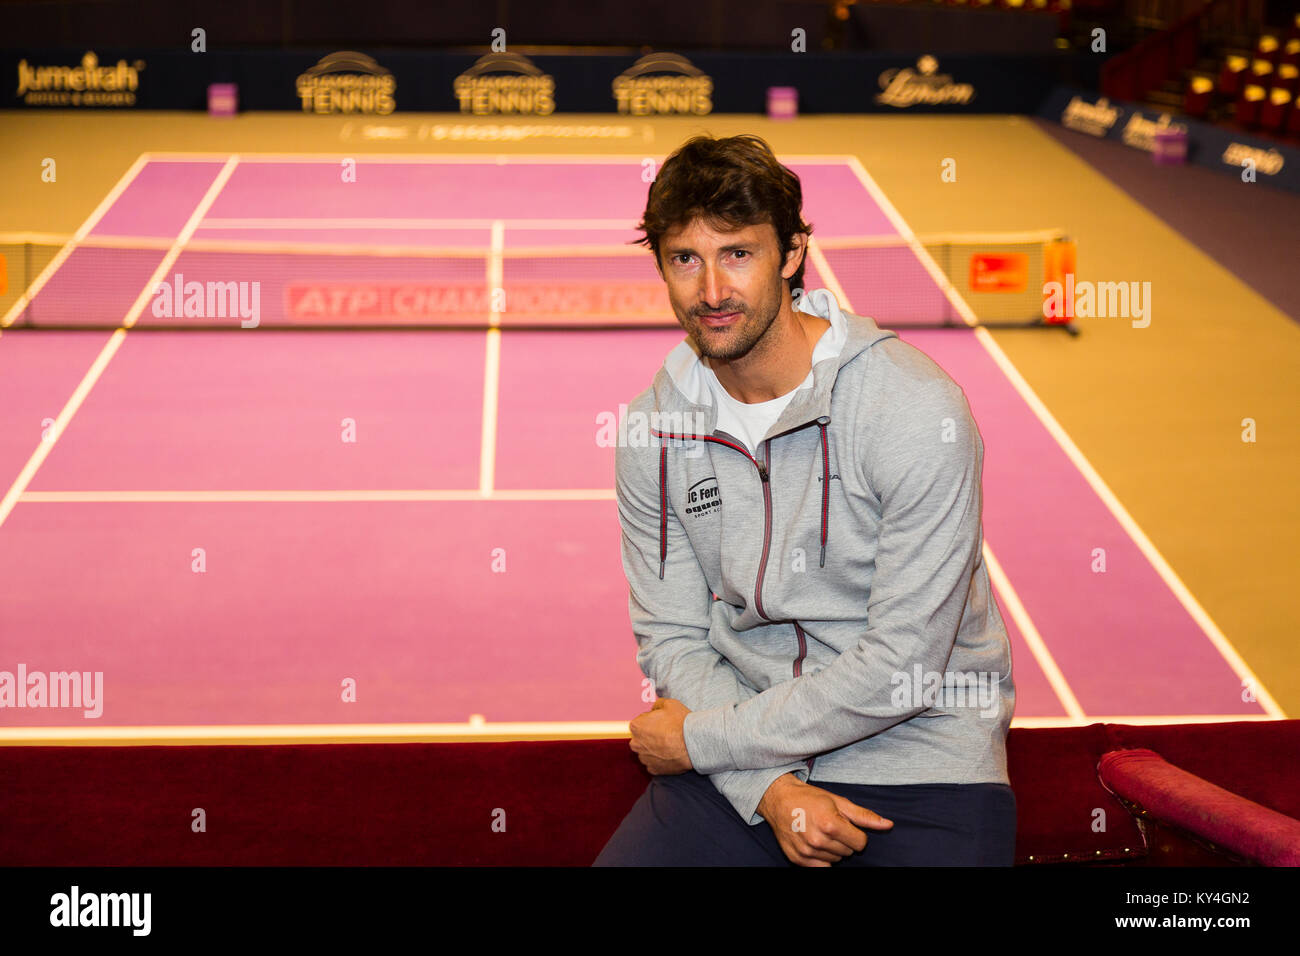 London, UK. Juan Carlos Ferrero poses during a photocall to mark the launch of the Champions' Tennis tournament at the Royal Albert Hall. Stock Photo